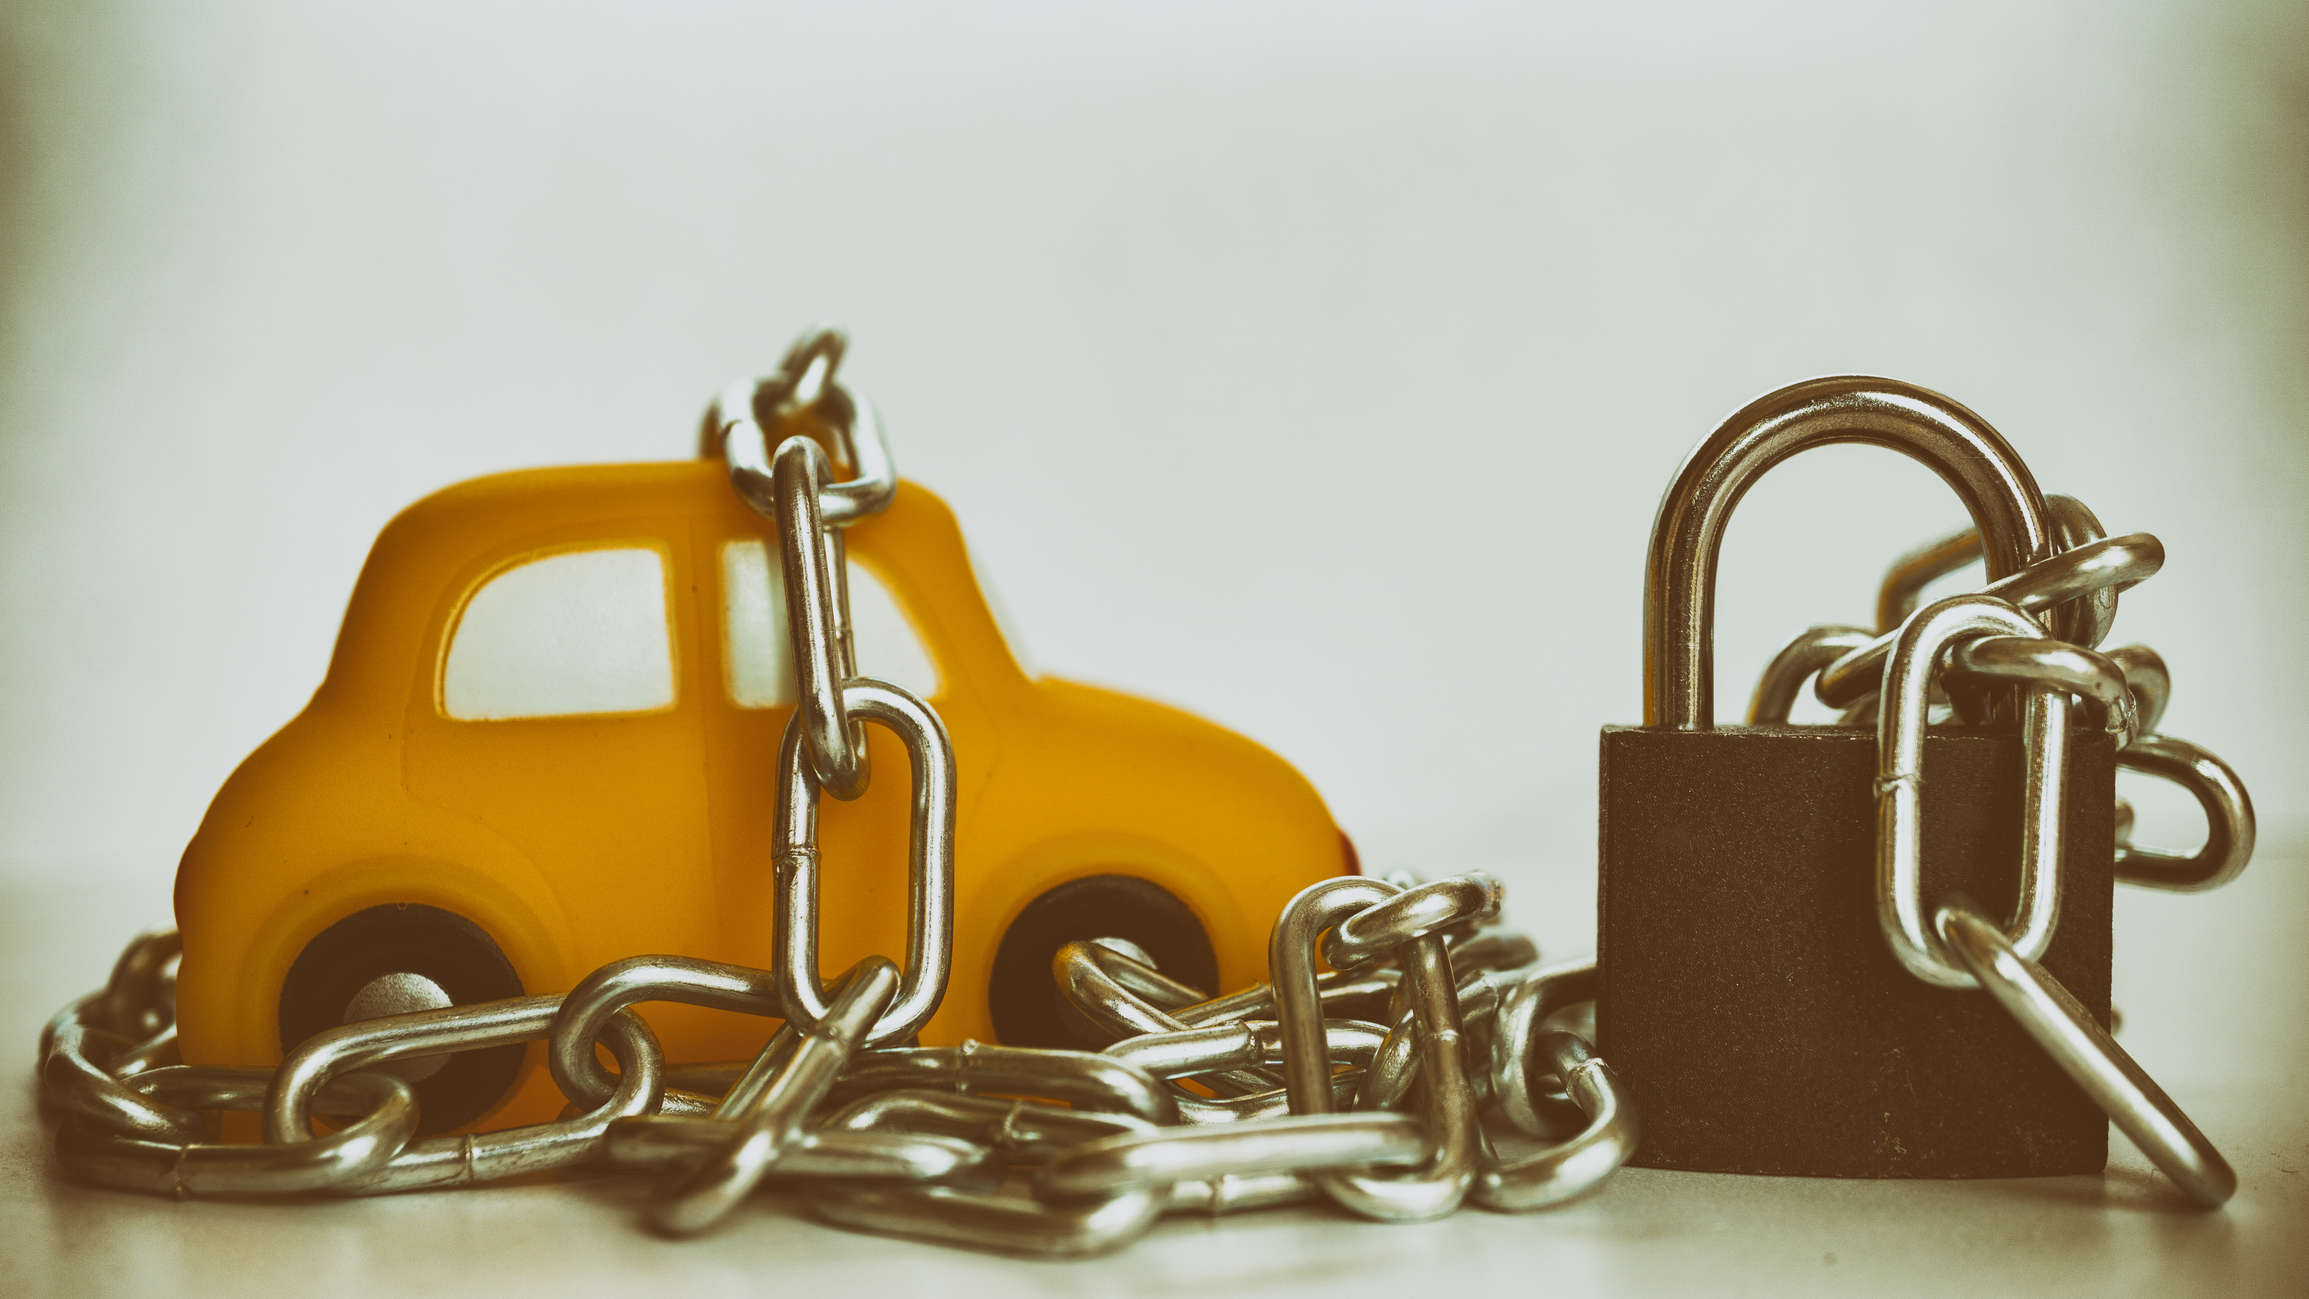 Large auto dealerships based in other states are also worried over the limited or delayed supply of vehicles shipped from the states currently having partial lockdowns.